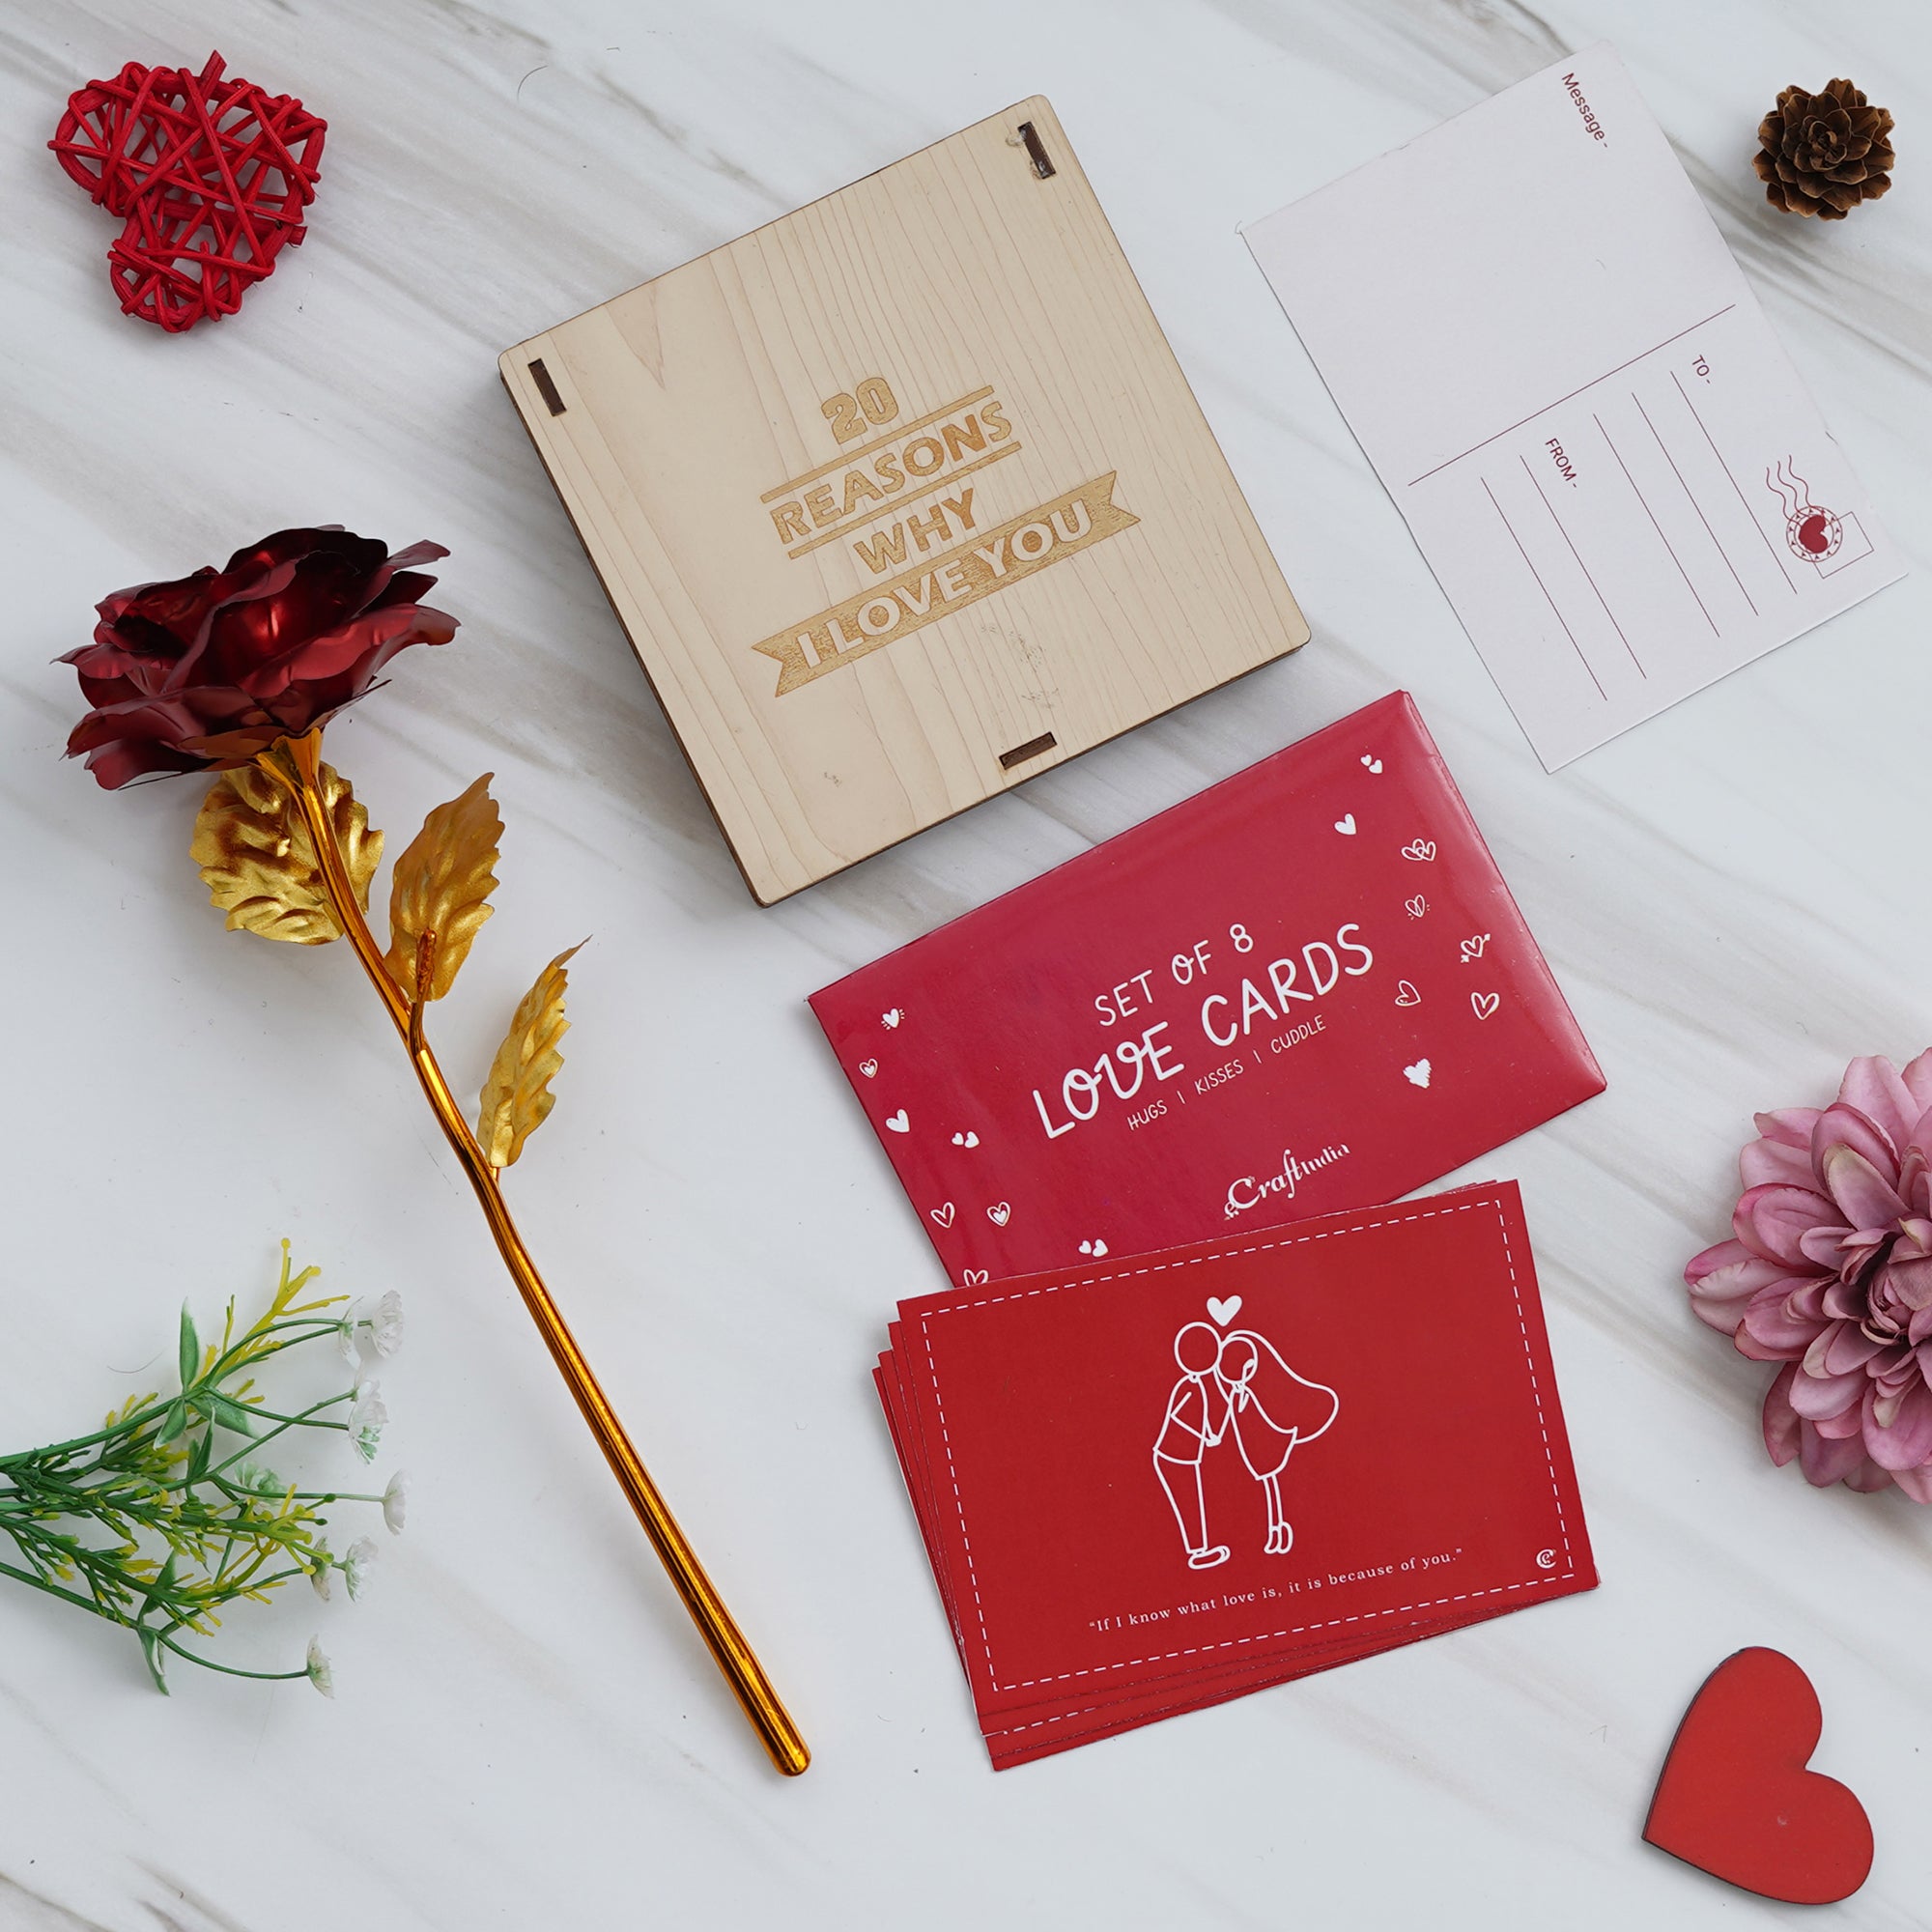 Valentine Combo of Pack of 8 Love Gift Cards, Golden Red Rose Gift Set, "20 Reasons Why I Love You" Printed on Little Hearts Wooden Gift Set